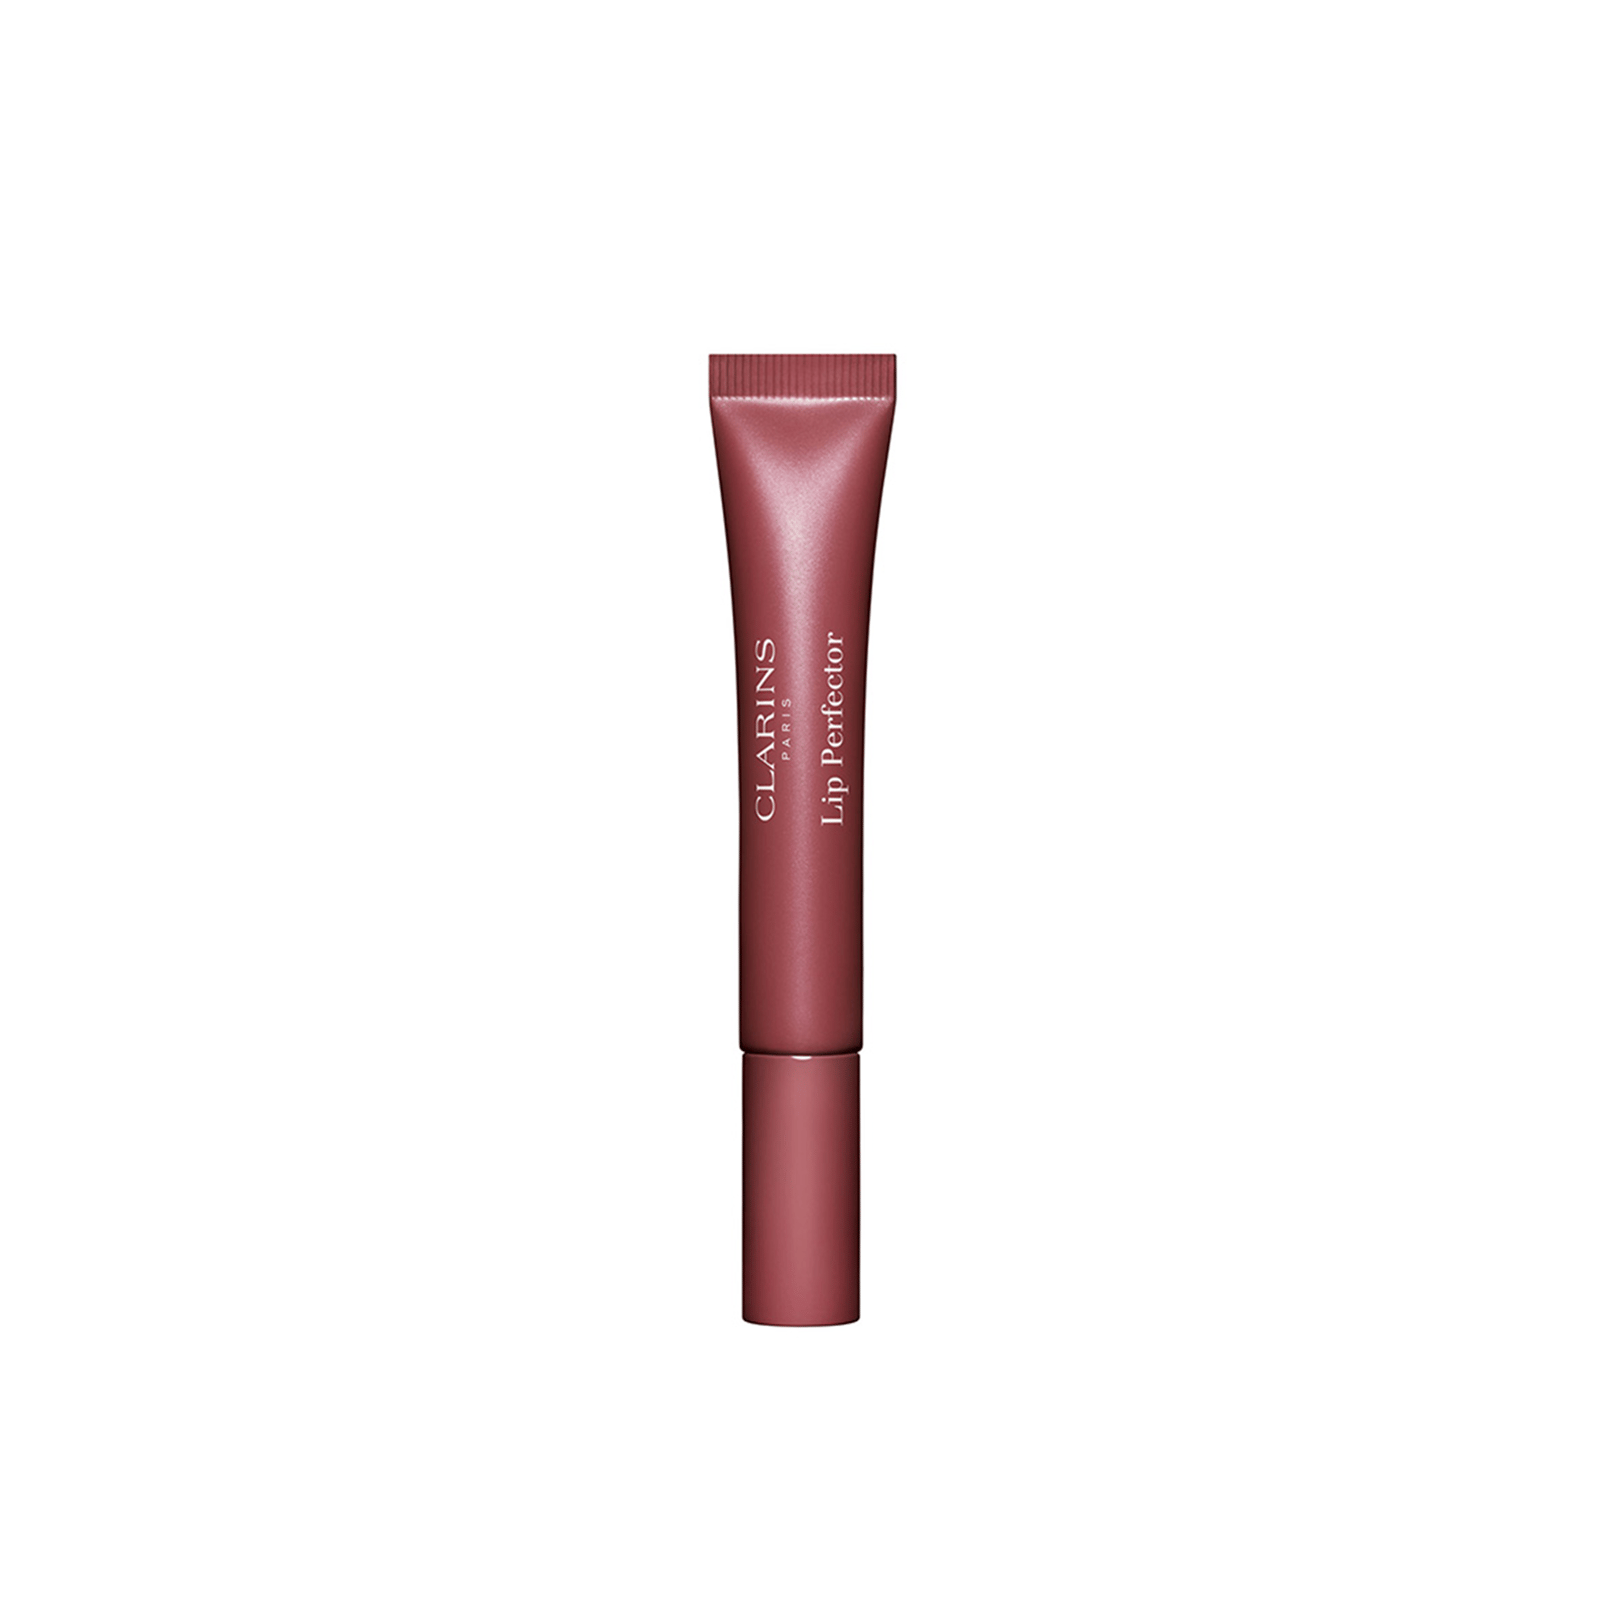 Clarins Lip Perfector 25 Mulberry Glow 12ml